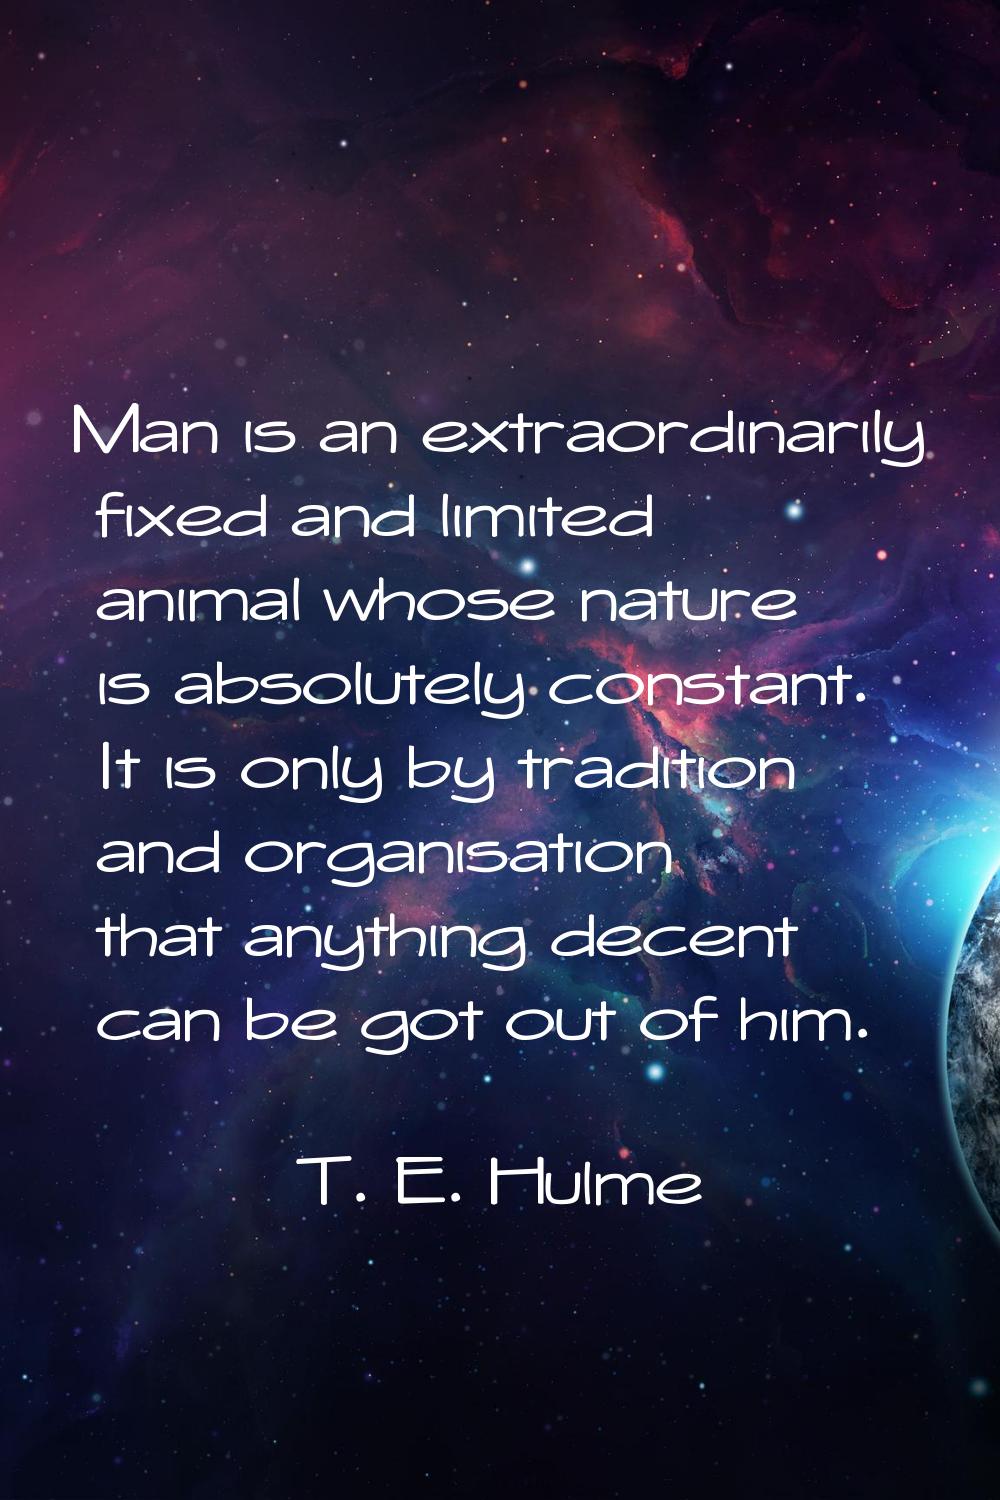 Man is an extraordinarily fixed and limited animal whose nature is absolutely constant. It is only 